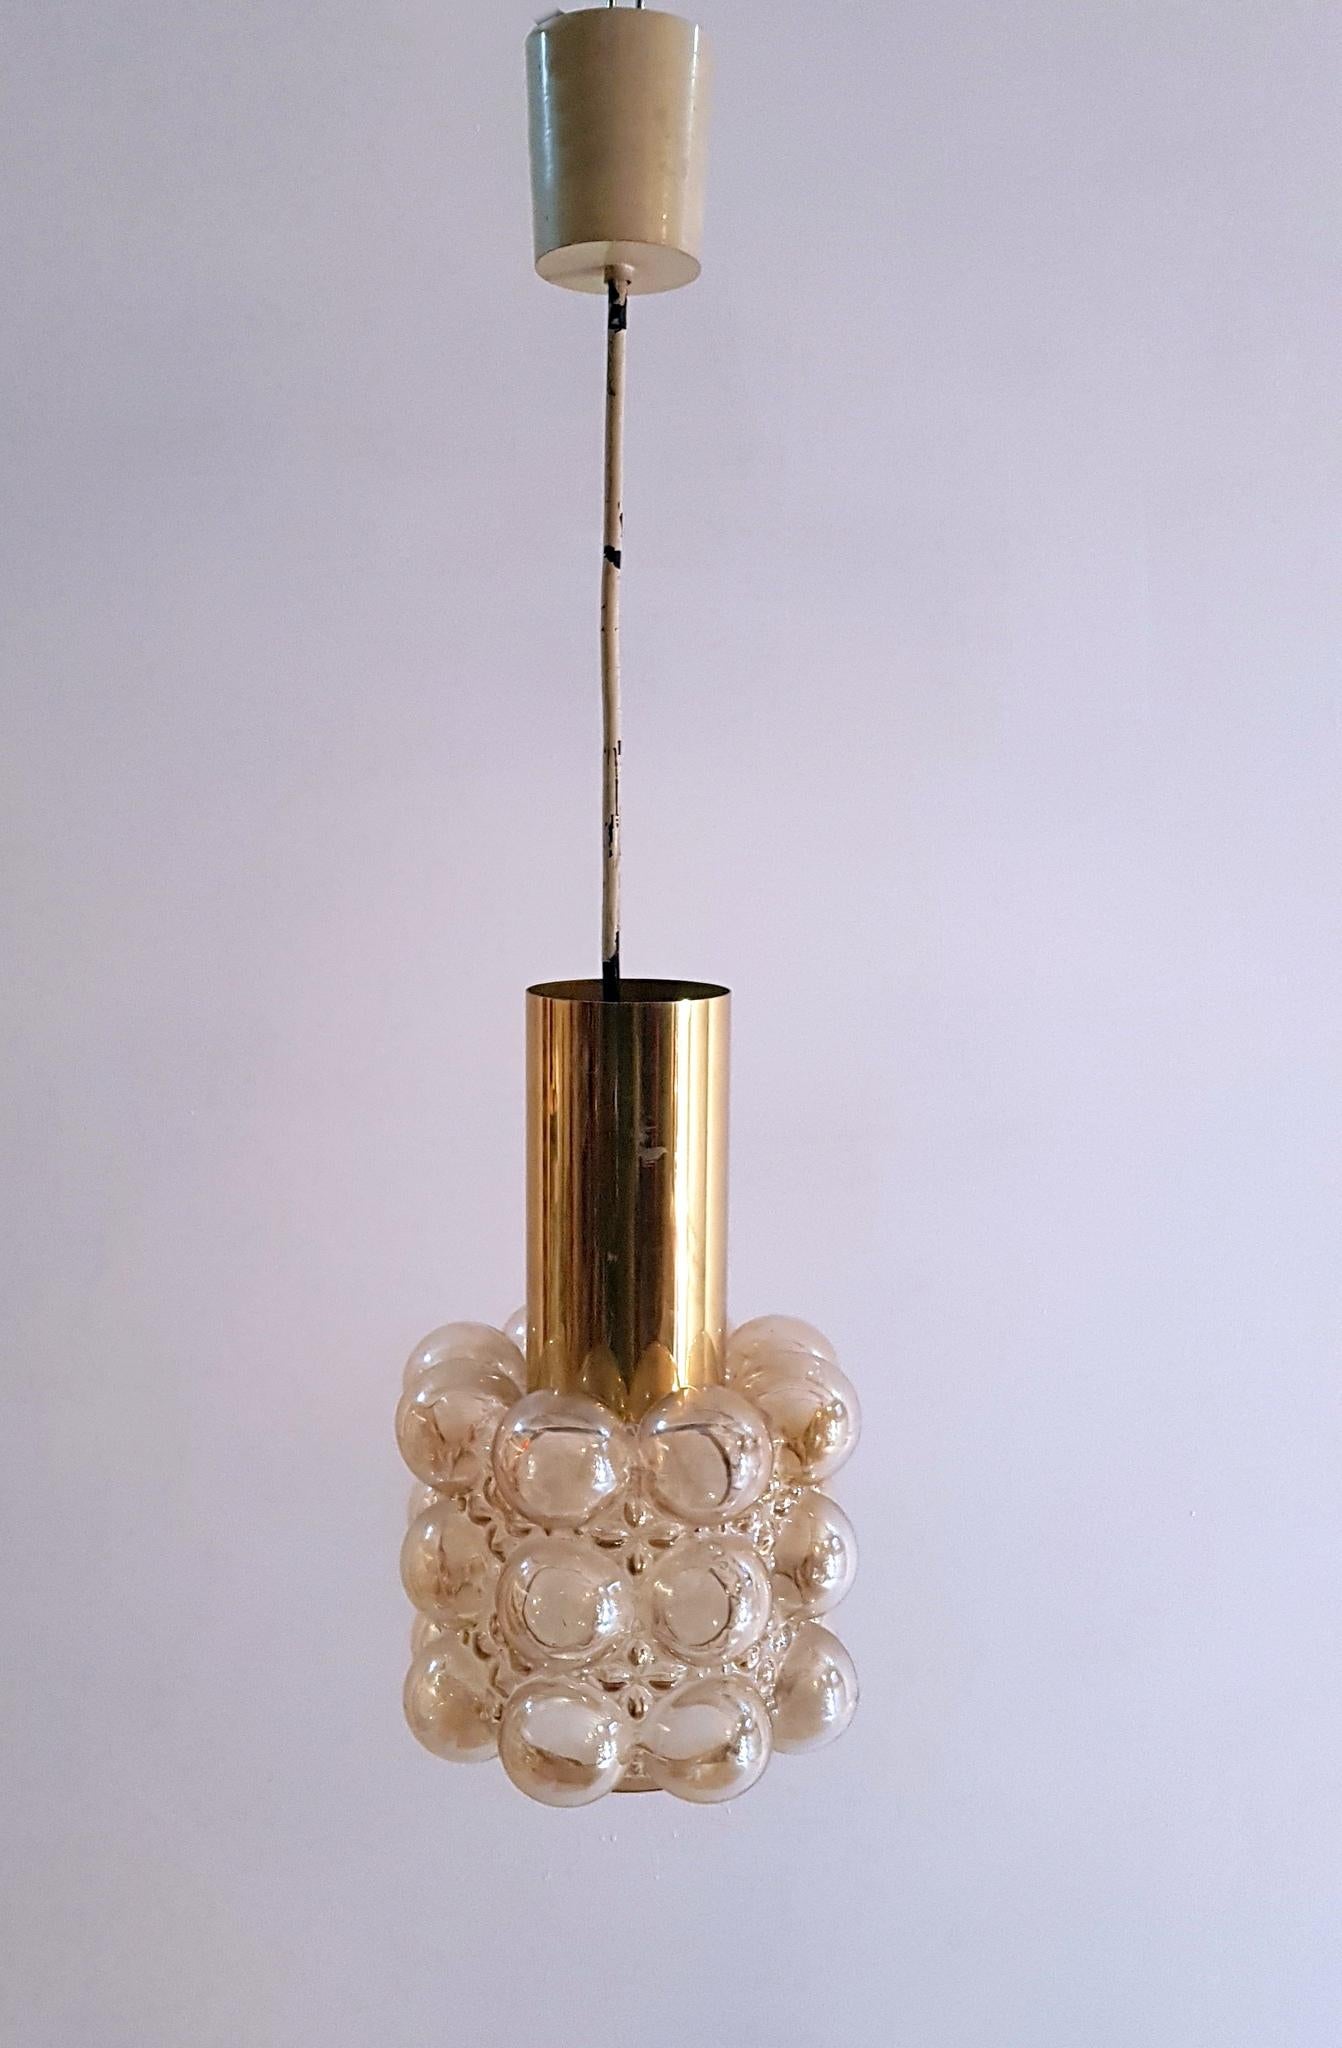 Classic glass bubble pendant lamp from the 1960s manufactured by Limburg and designed by Helena Tynell.
Very good vintage condition with little signs of wear and fully functional. Has the original cord in the pictures but will be changed unless